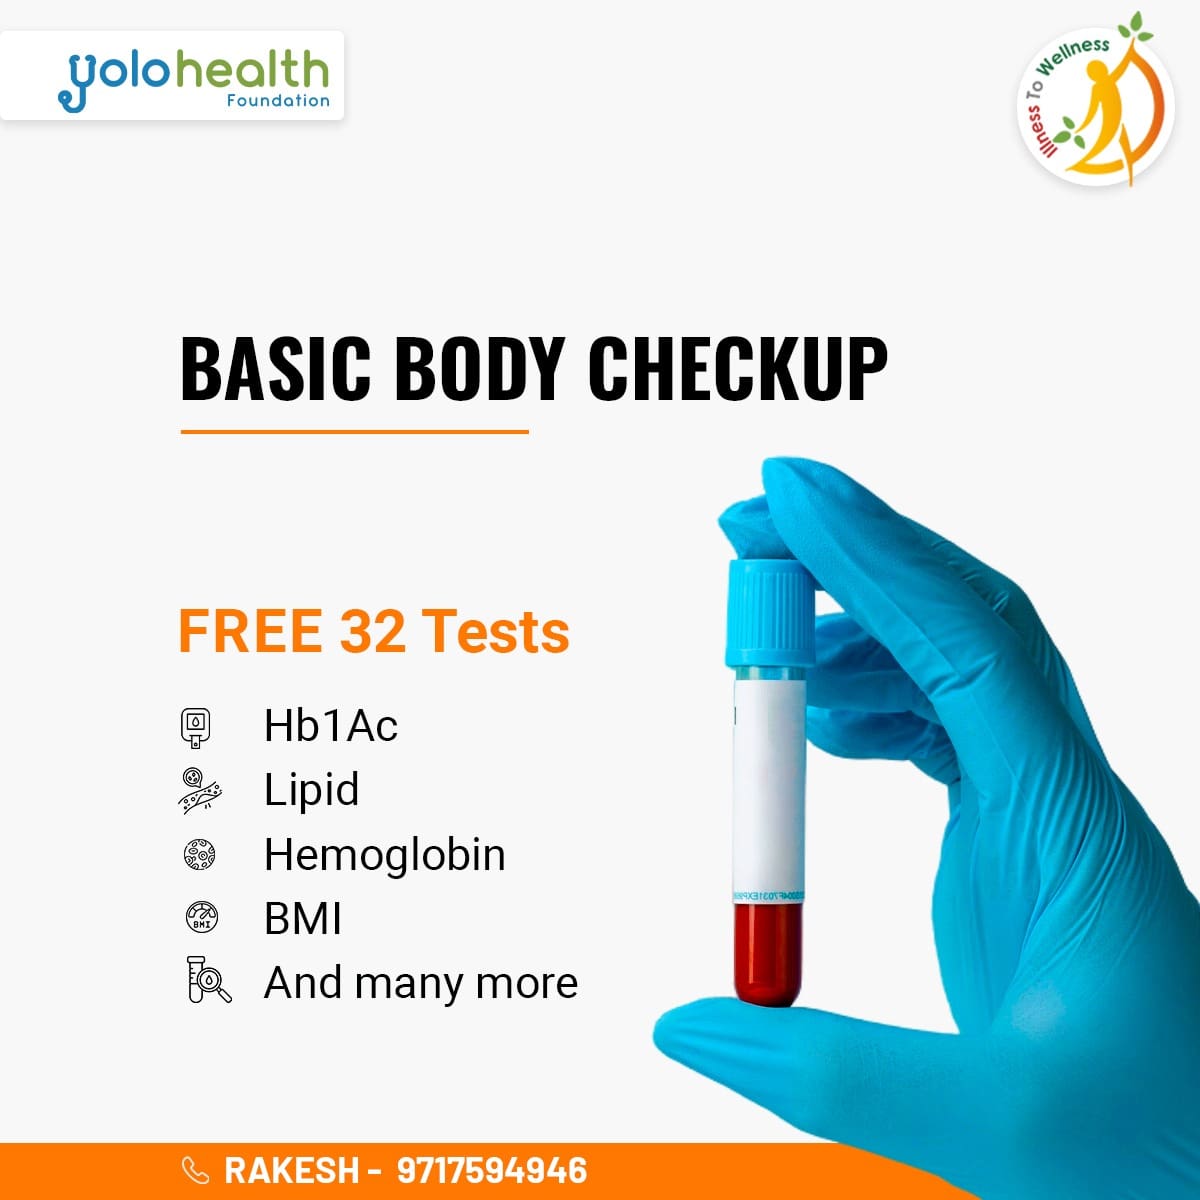 Prioritize your well-being! 
Avail a comprehensive free body checkup featuring 32 tests like Hb 1Ac, Lipid, Hemoglobin, and BMI. At Aggarwal Digamber Jain Mandir, Connaught Place, New Delhi, 10 Am Onwards. Presented by @YoloHealth_In and @itwsays

#HealthCamp #HealthAwareness…